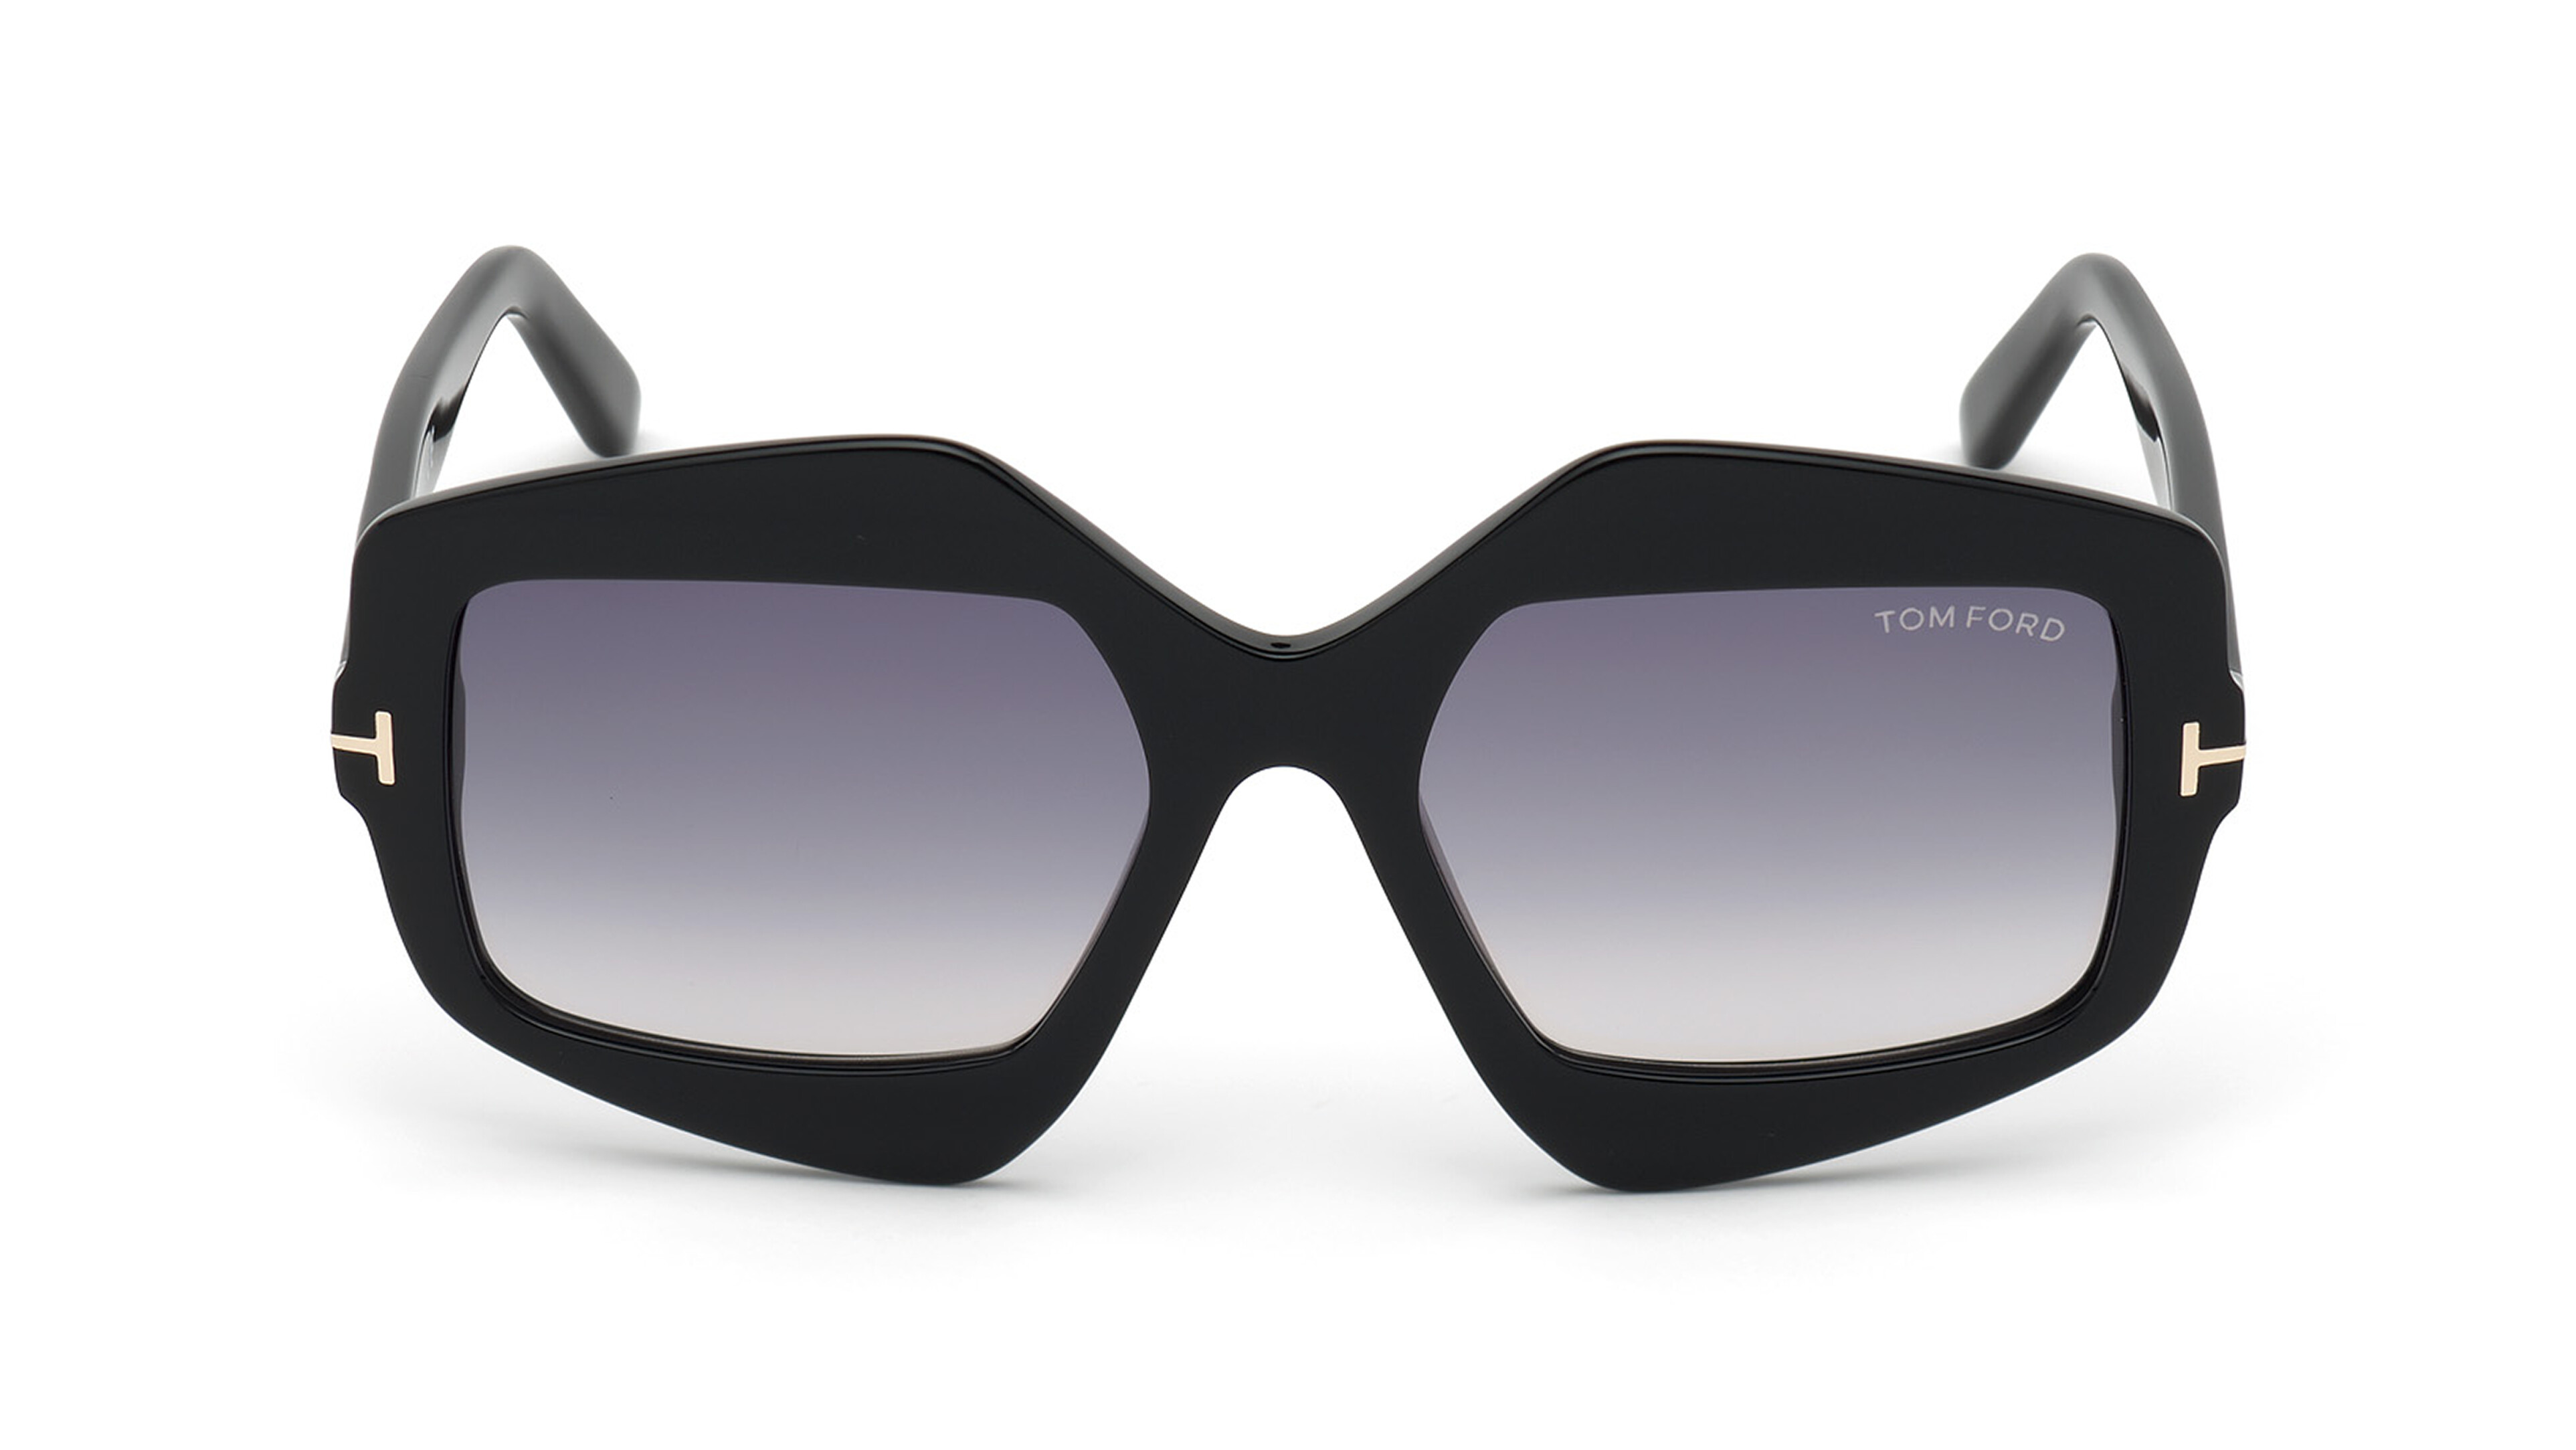 [products.image.front] Tom Ford FT0789 01B Sonnenbrille